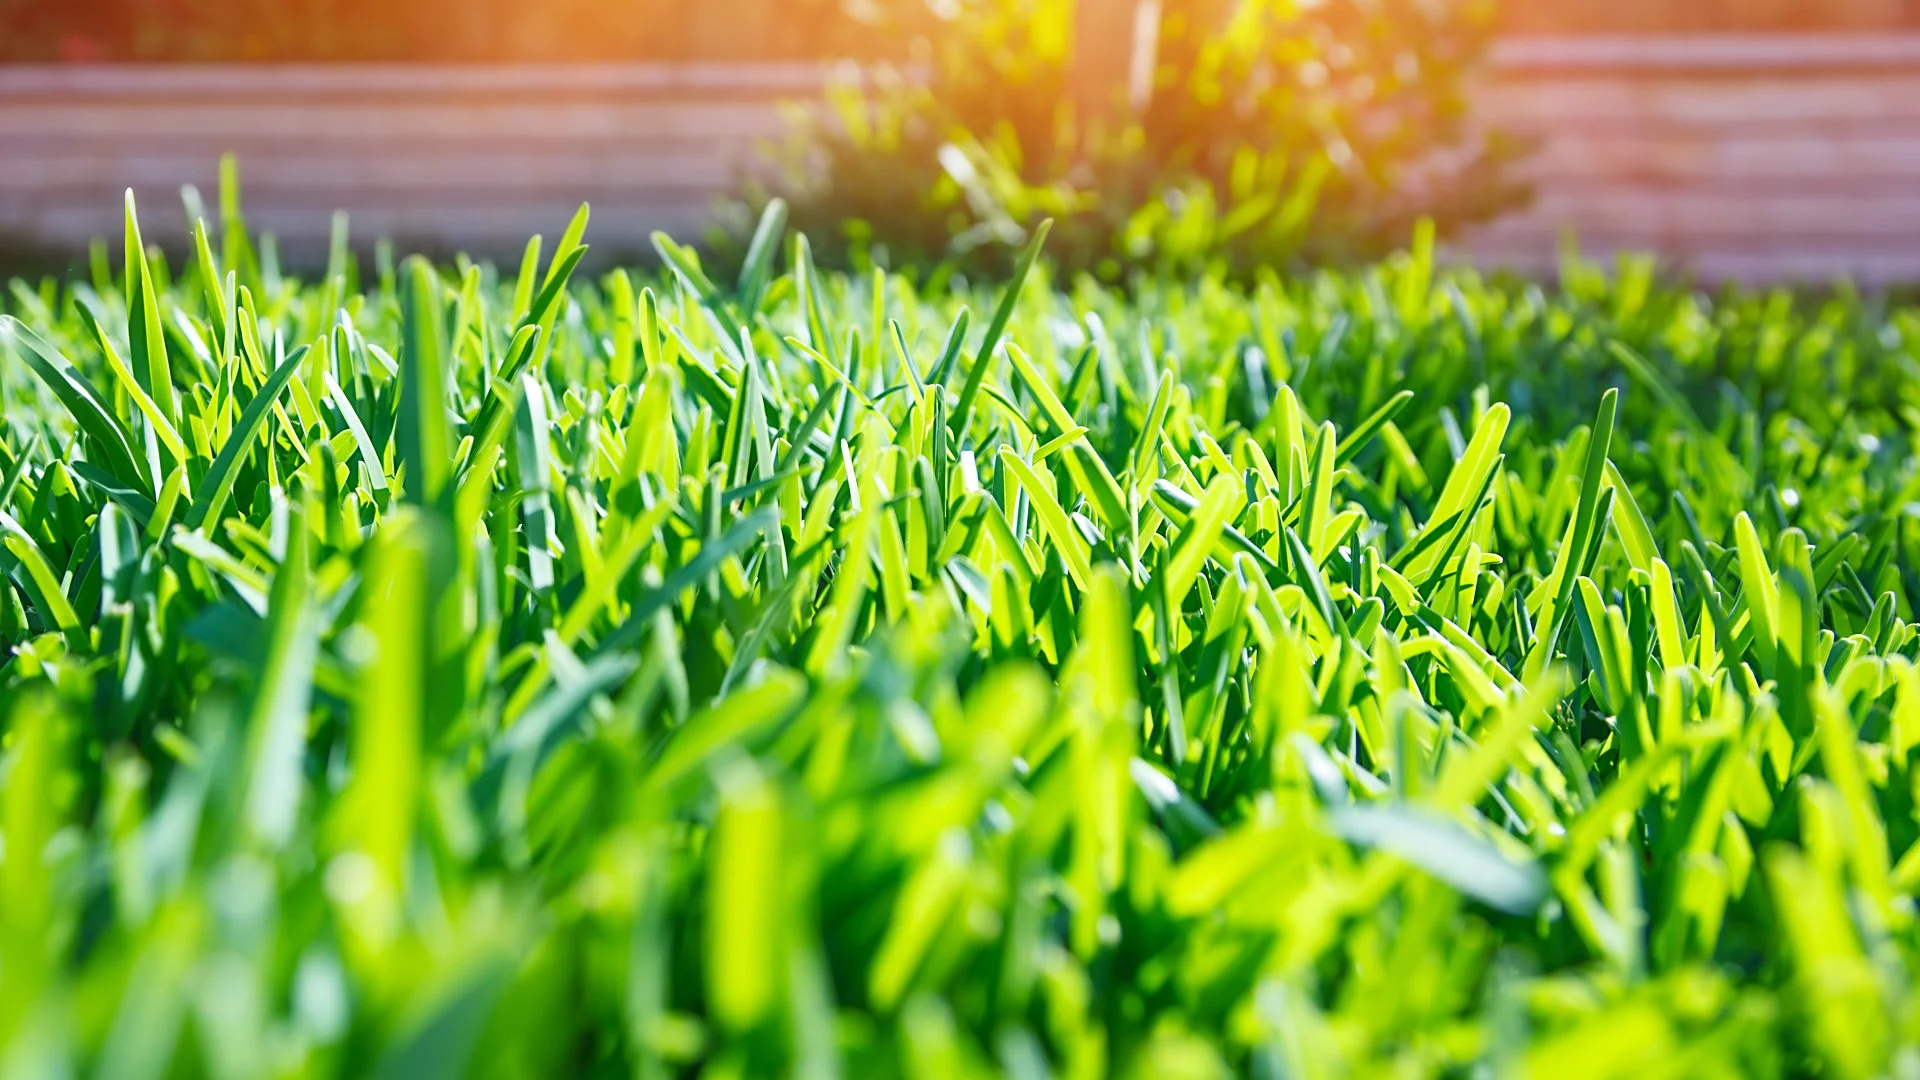 Fall Lawn Care Services That Can Help You Get a Healthy & Beautiful Lawn